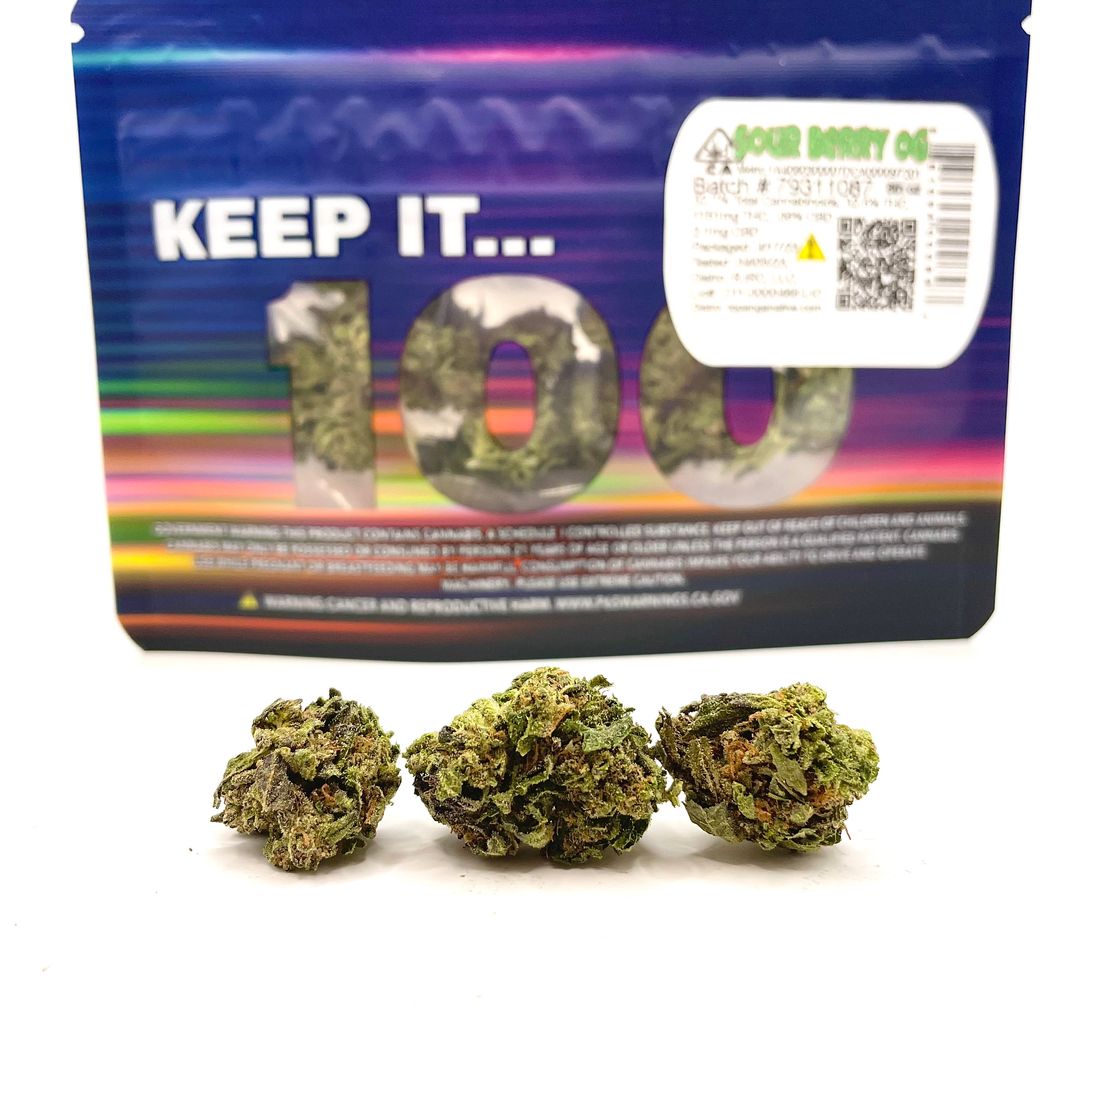 *BLOWOUT DEAL! $25 1/8 Sour Berry OG (32.5%/Hybrid) - Keep it 100